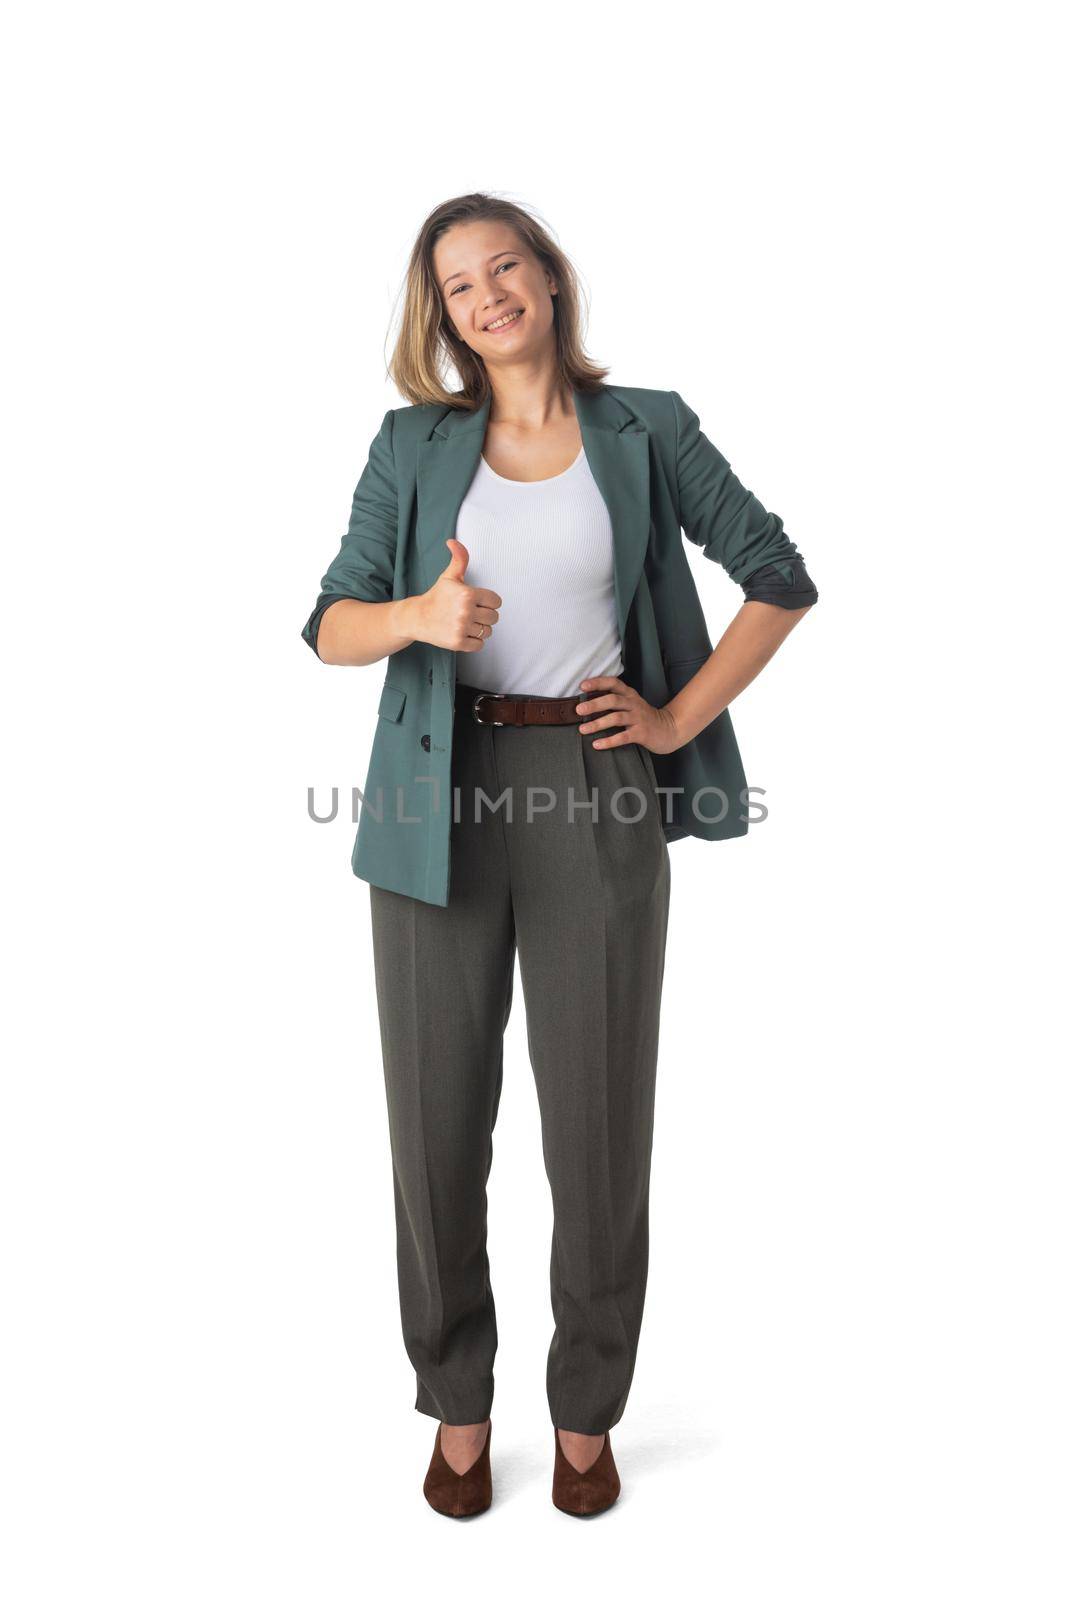 Friendly business woman with thumb up by ALotOfPeople